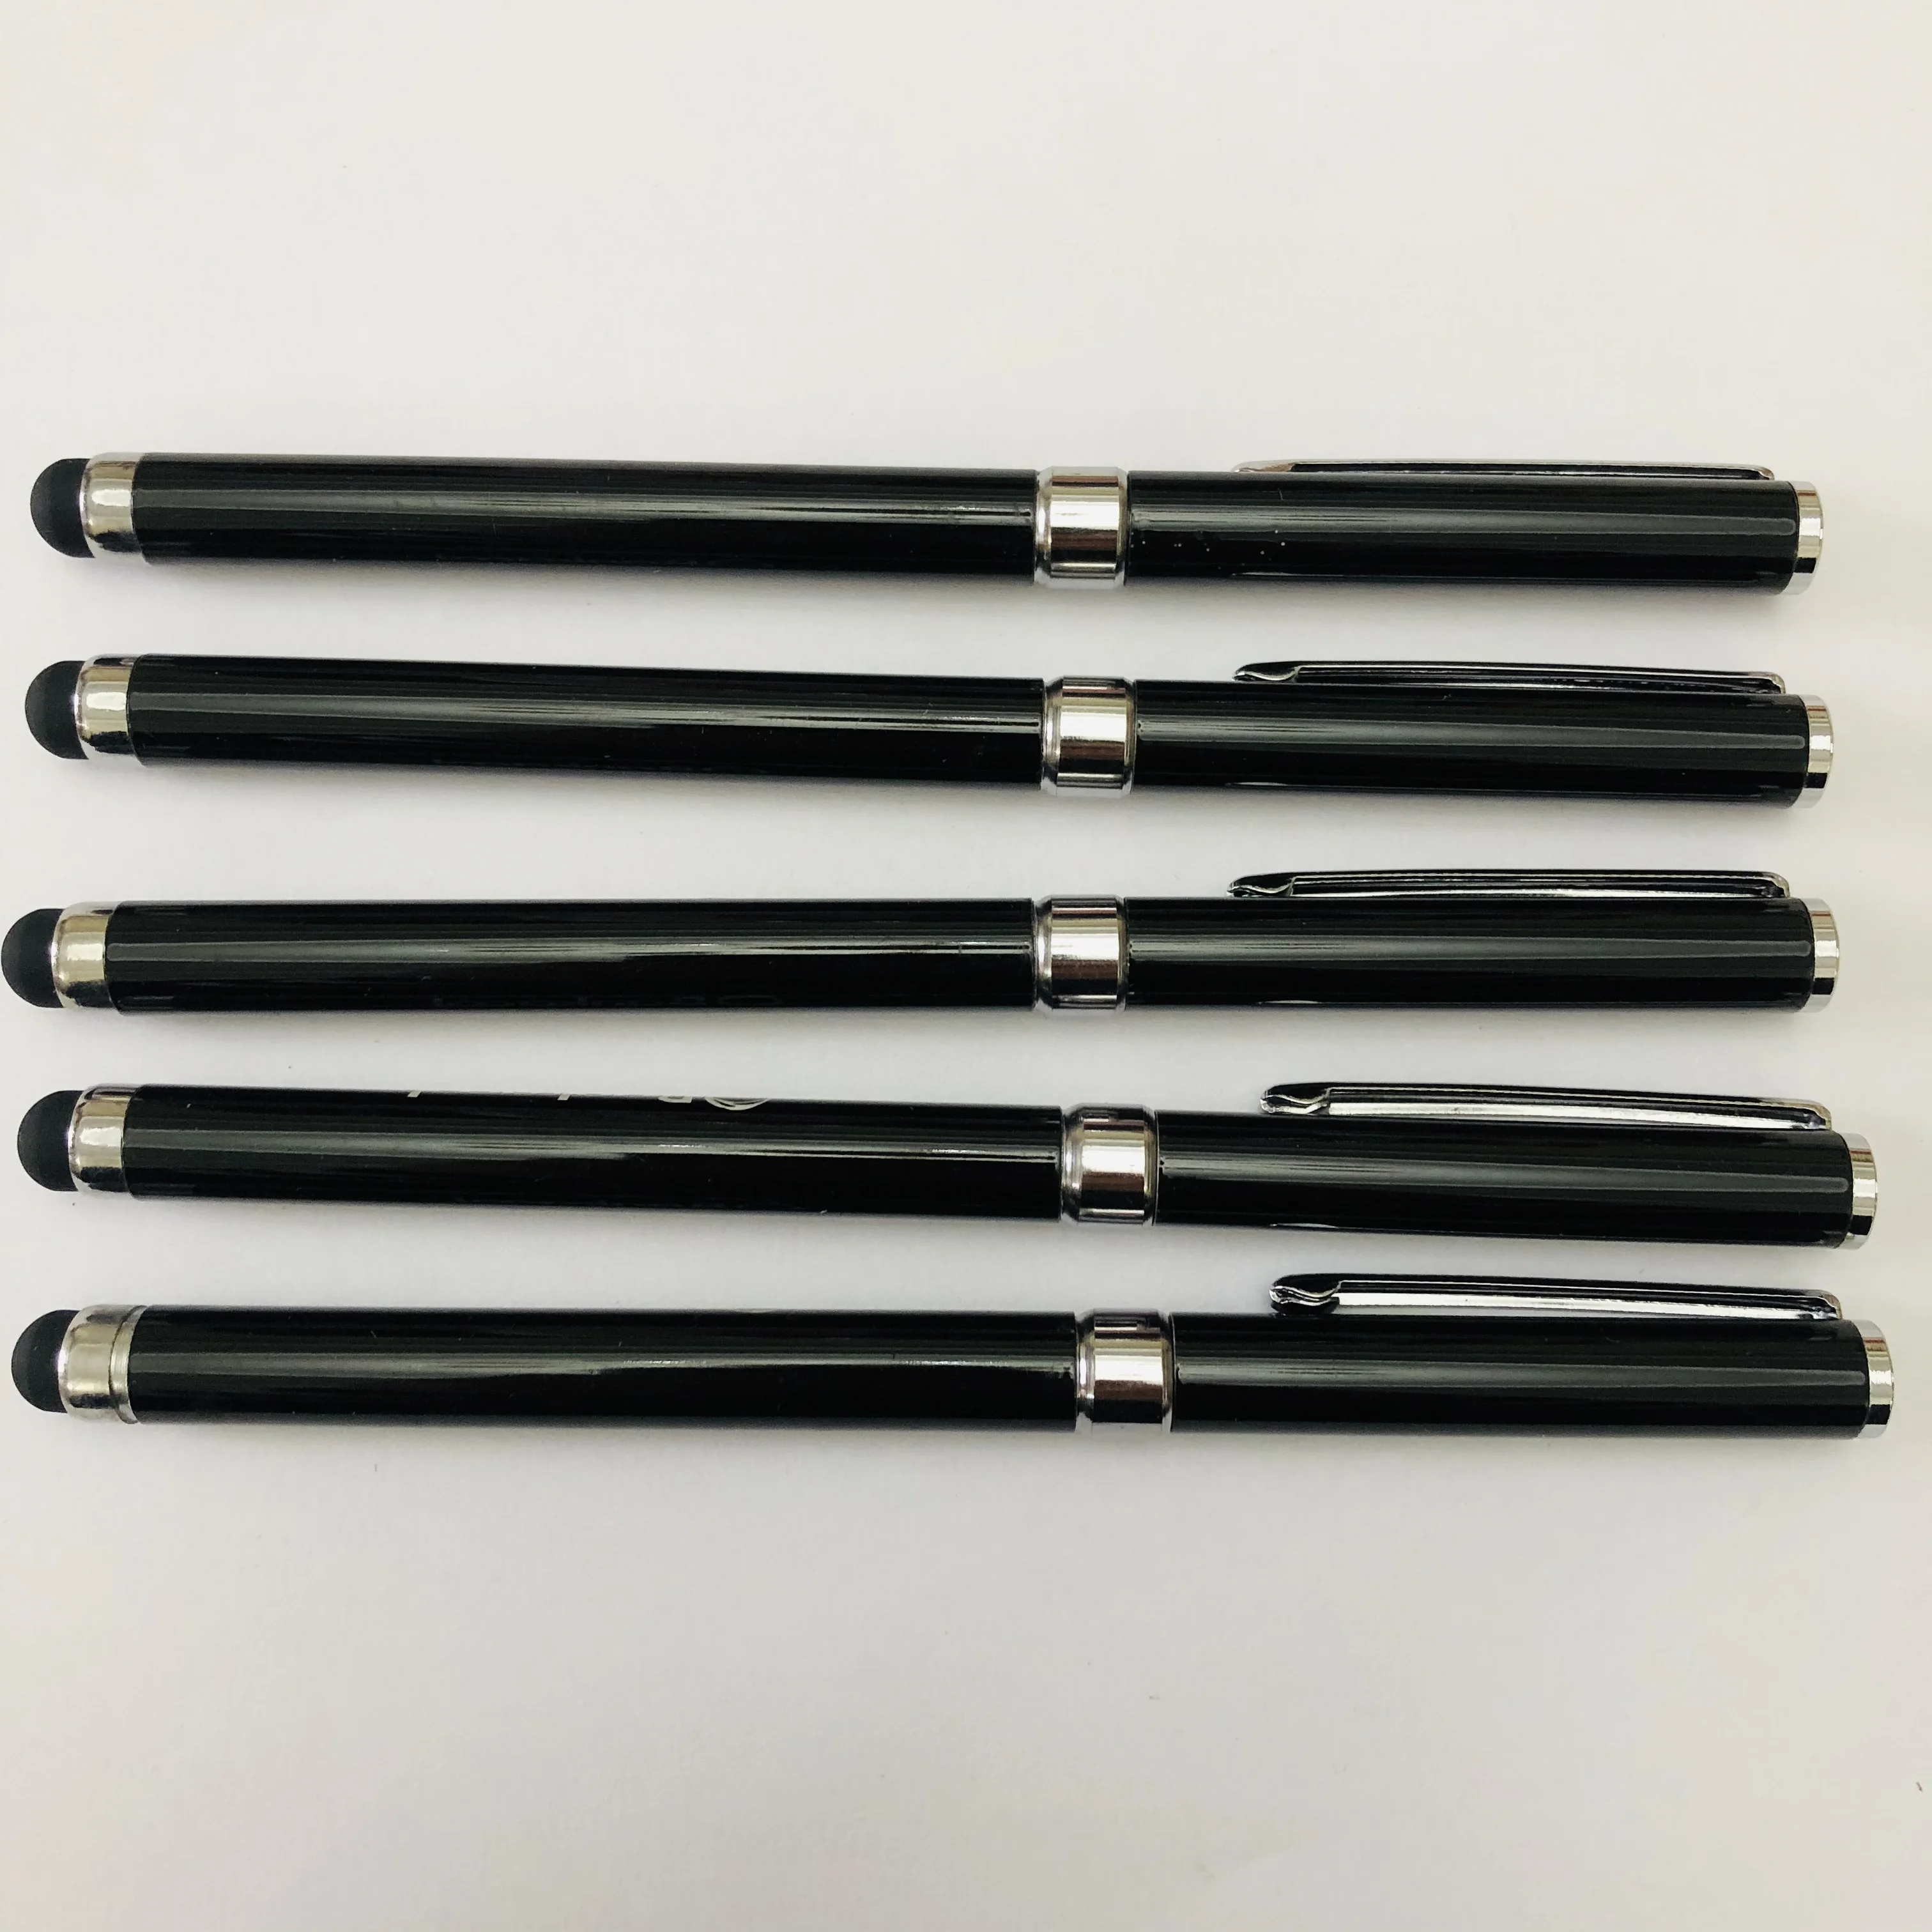 

Hot sales high quality advertisement black metal pen promotional ball point pen with stylus brand custom logo